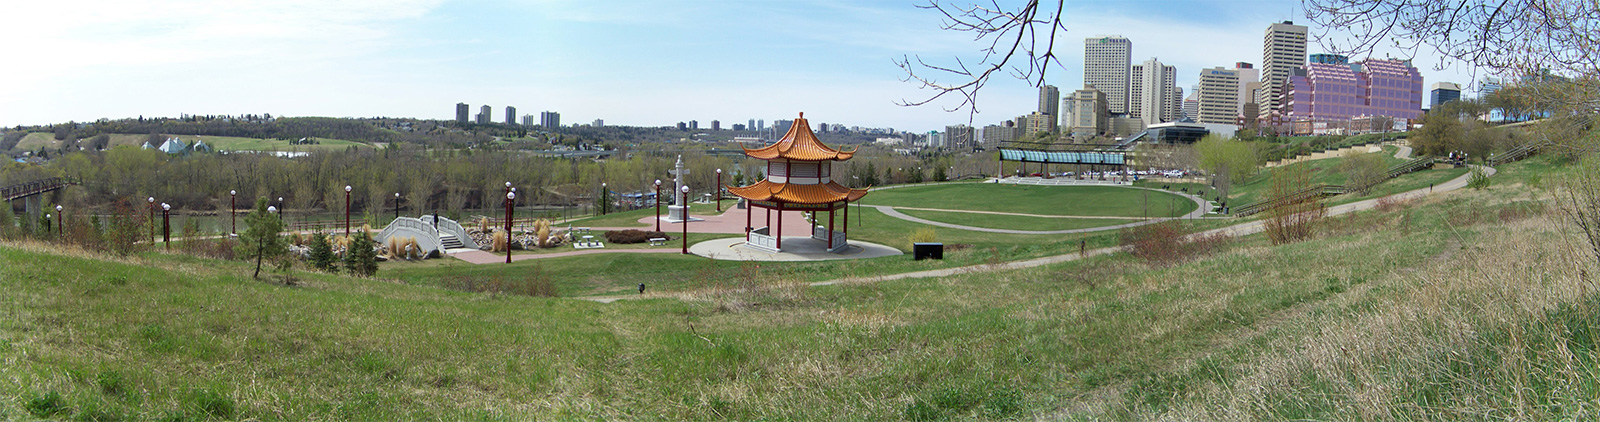 Millennium Plaza, Oval Lawn and the Chinese Garden